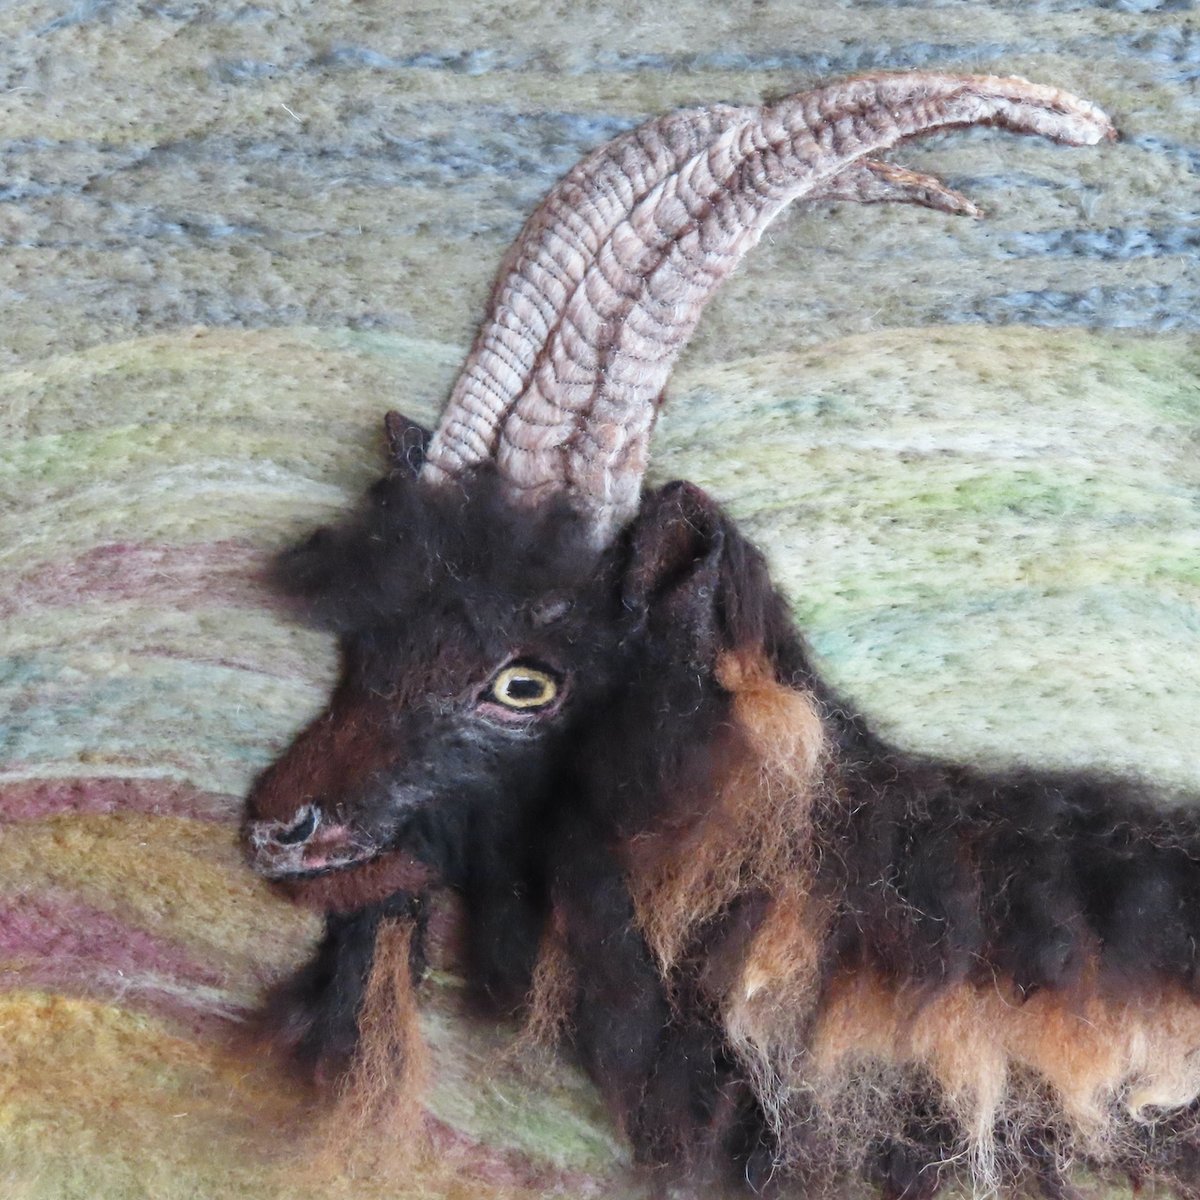 This #bagotgoat was photographed at the @RBSTrarebreeds show and sale at #meltonmowbraymarket and needle felted with locally sourced wool and alpaca fibres.#lakedistrictartist #britishnativebreeds #madeincumbria